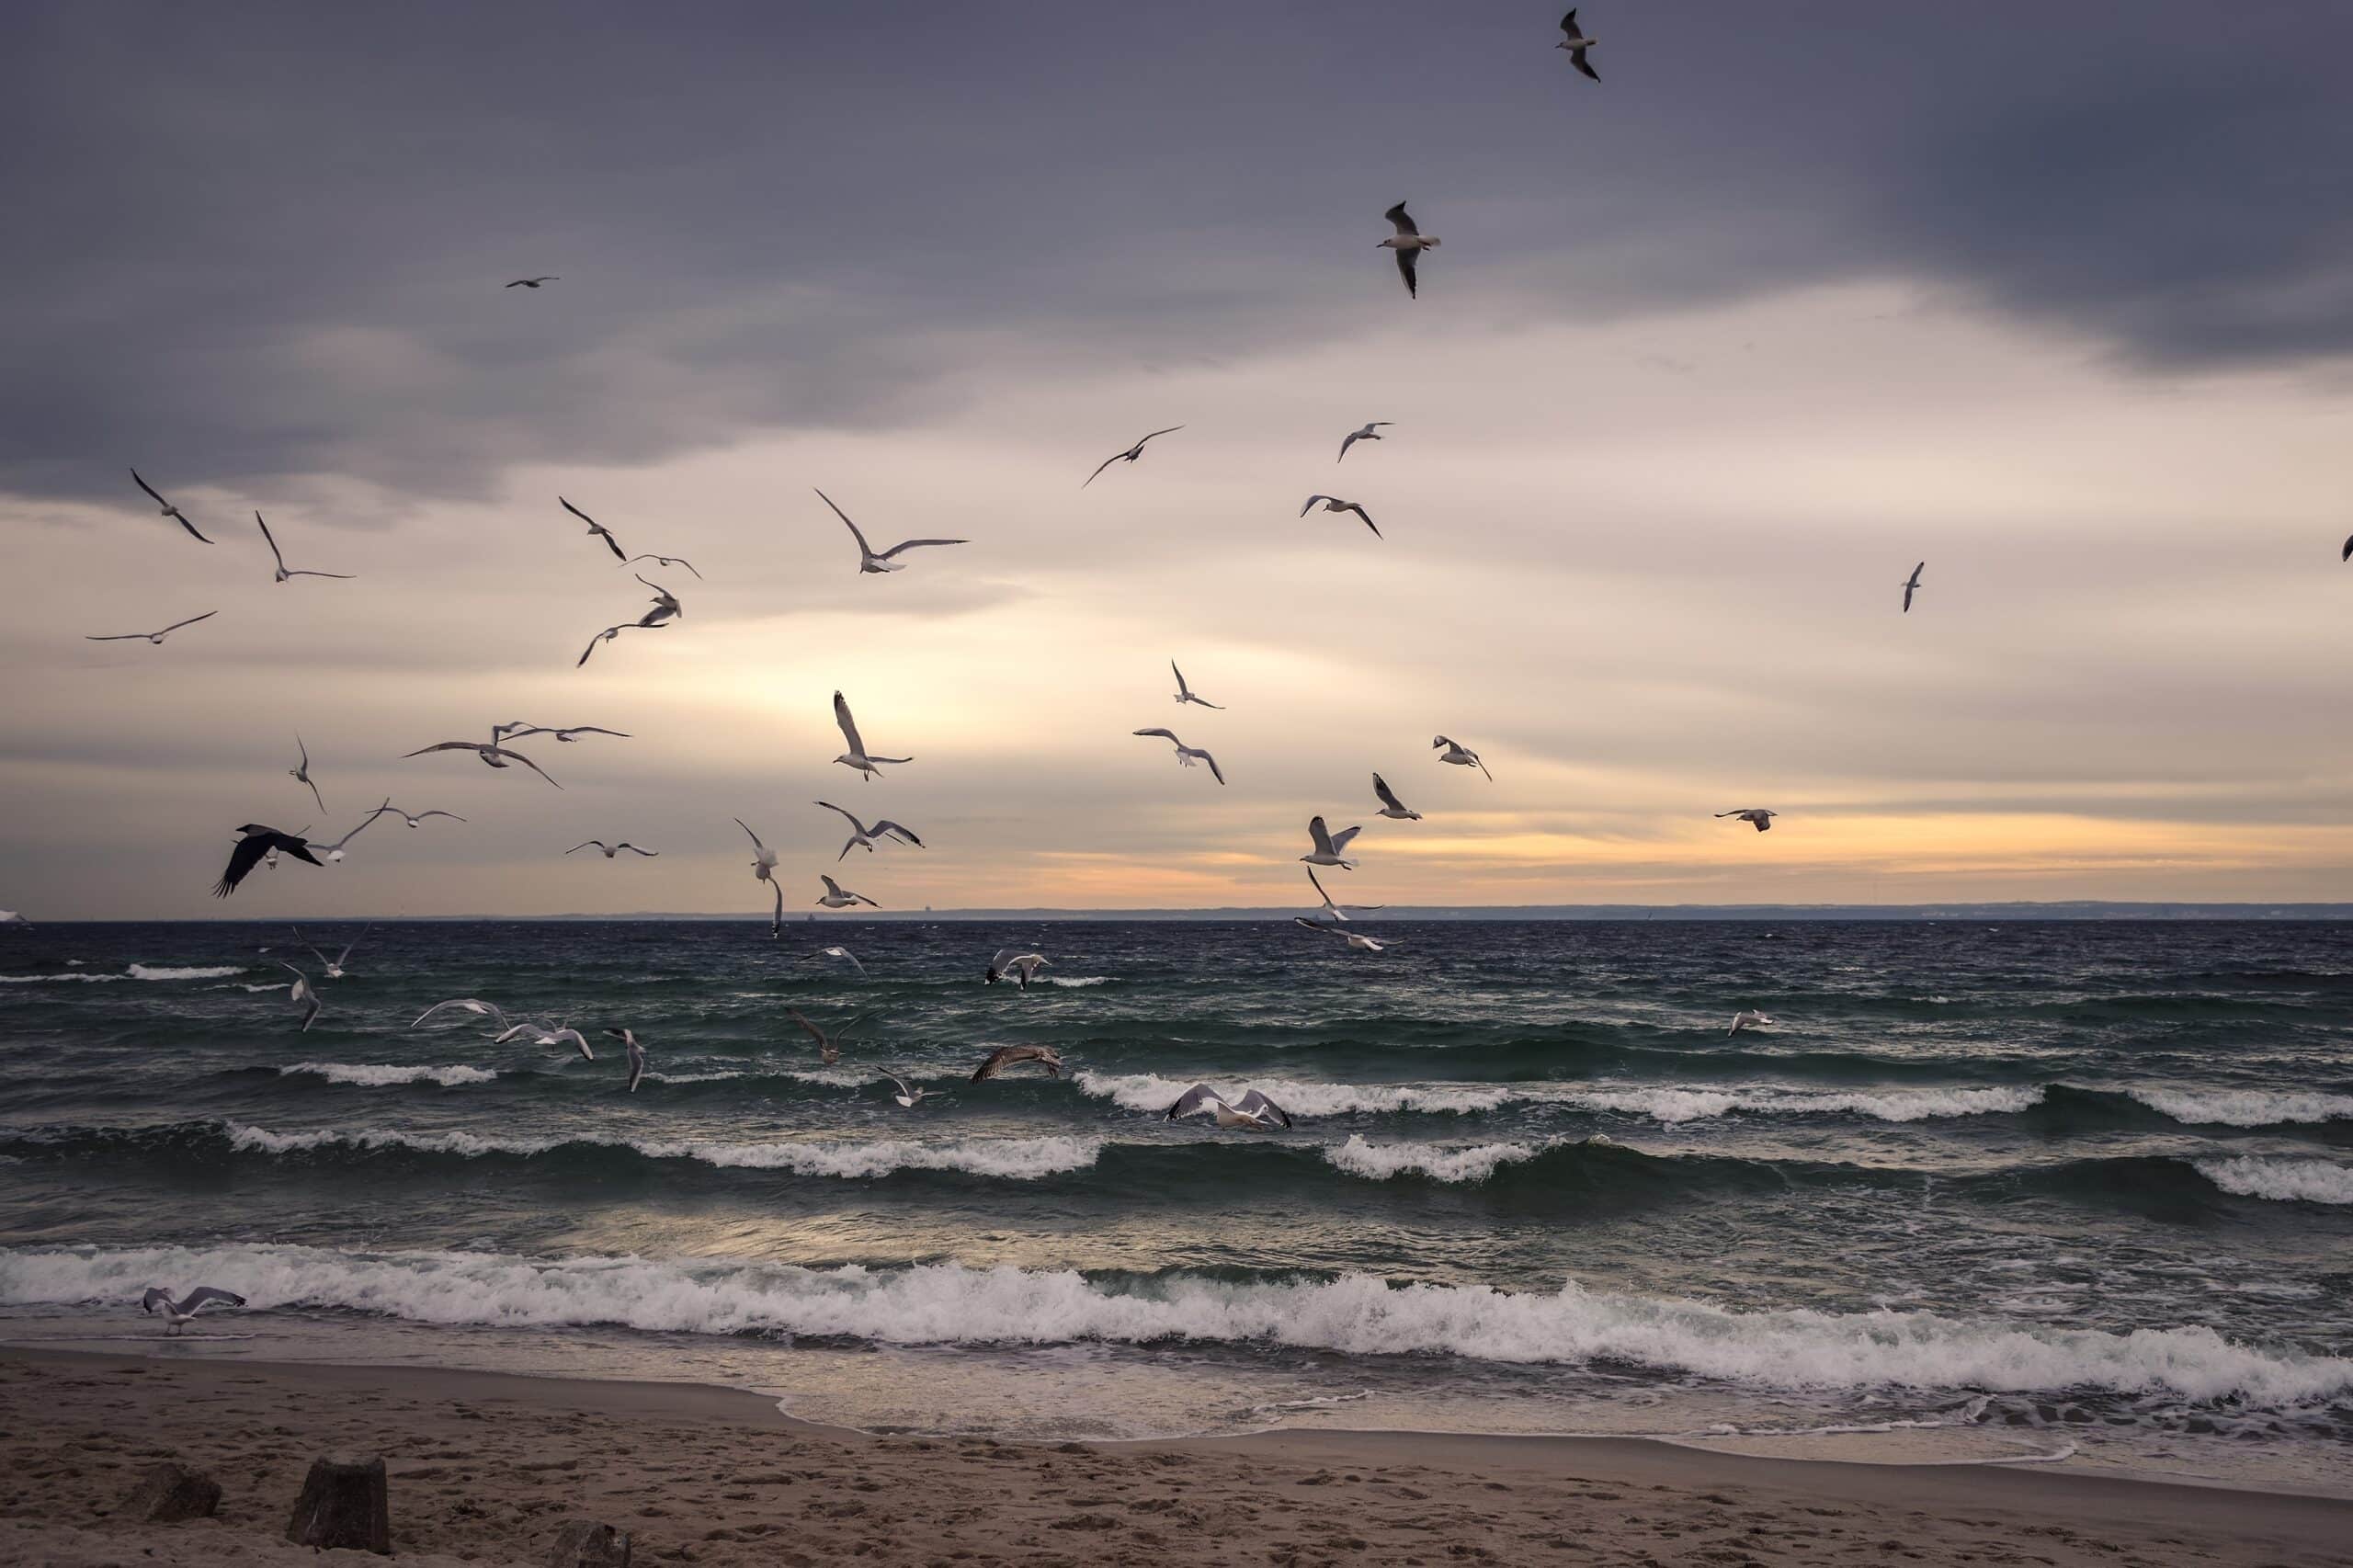 Seashore at dusk with clouds in the sky, seawalls and seagulls flying overhead on a sandy beach.